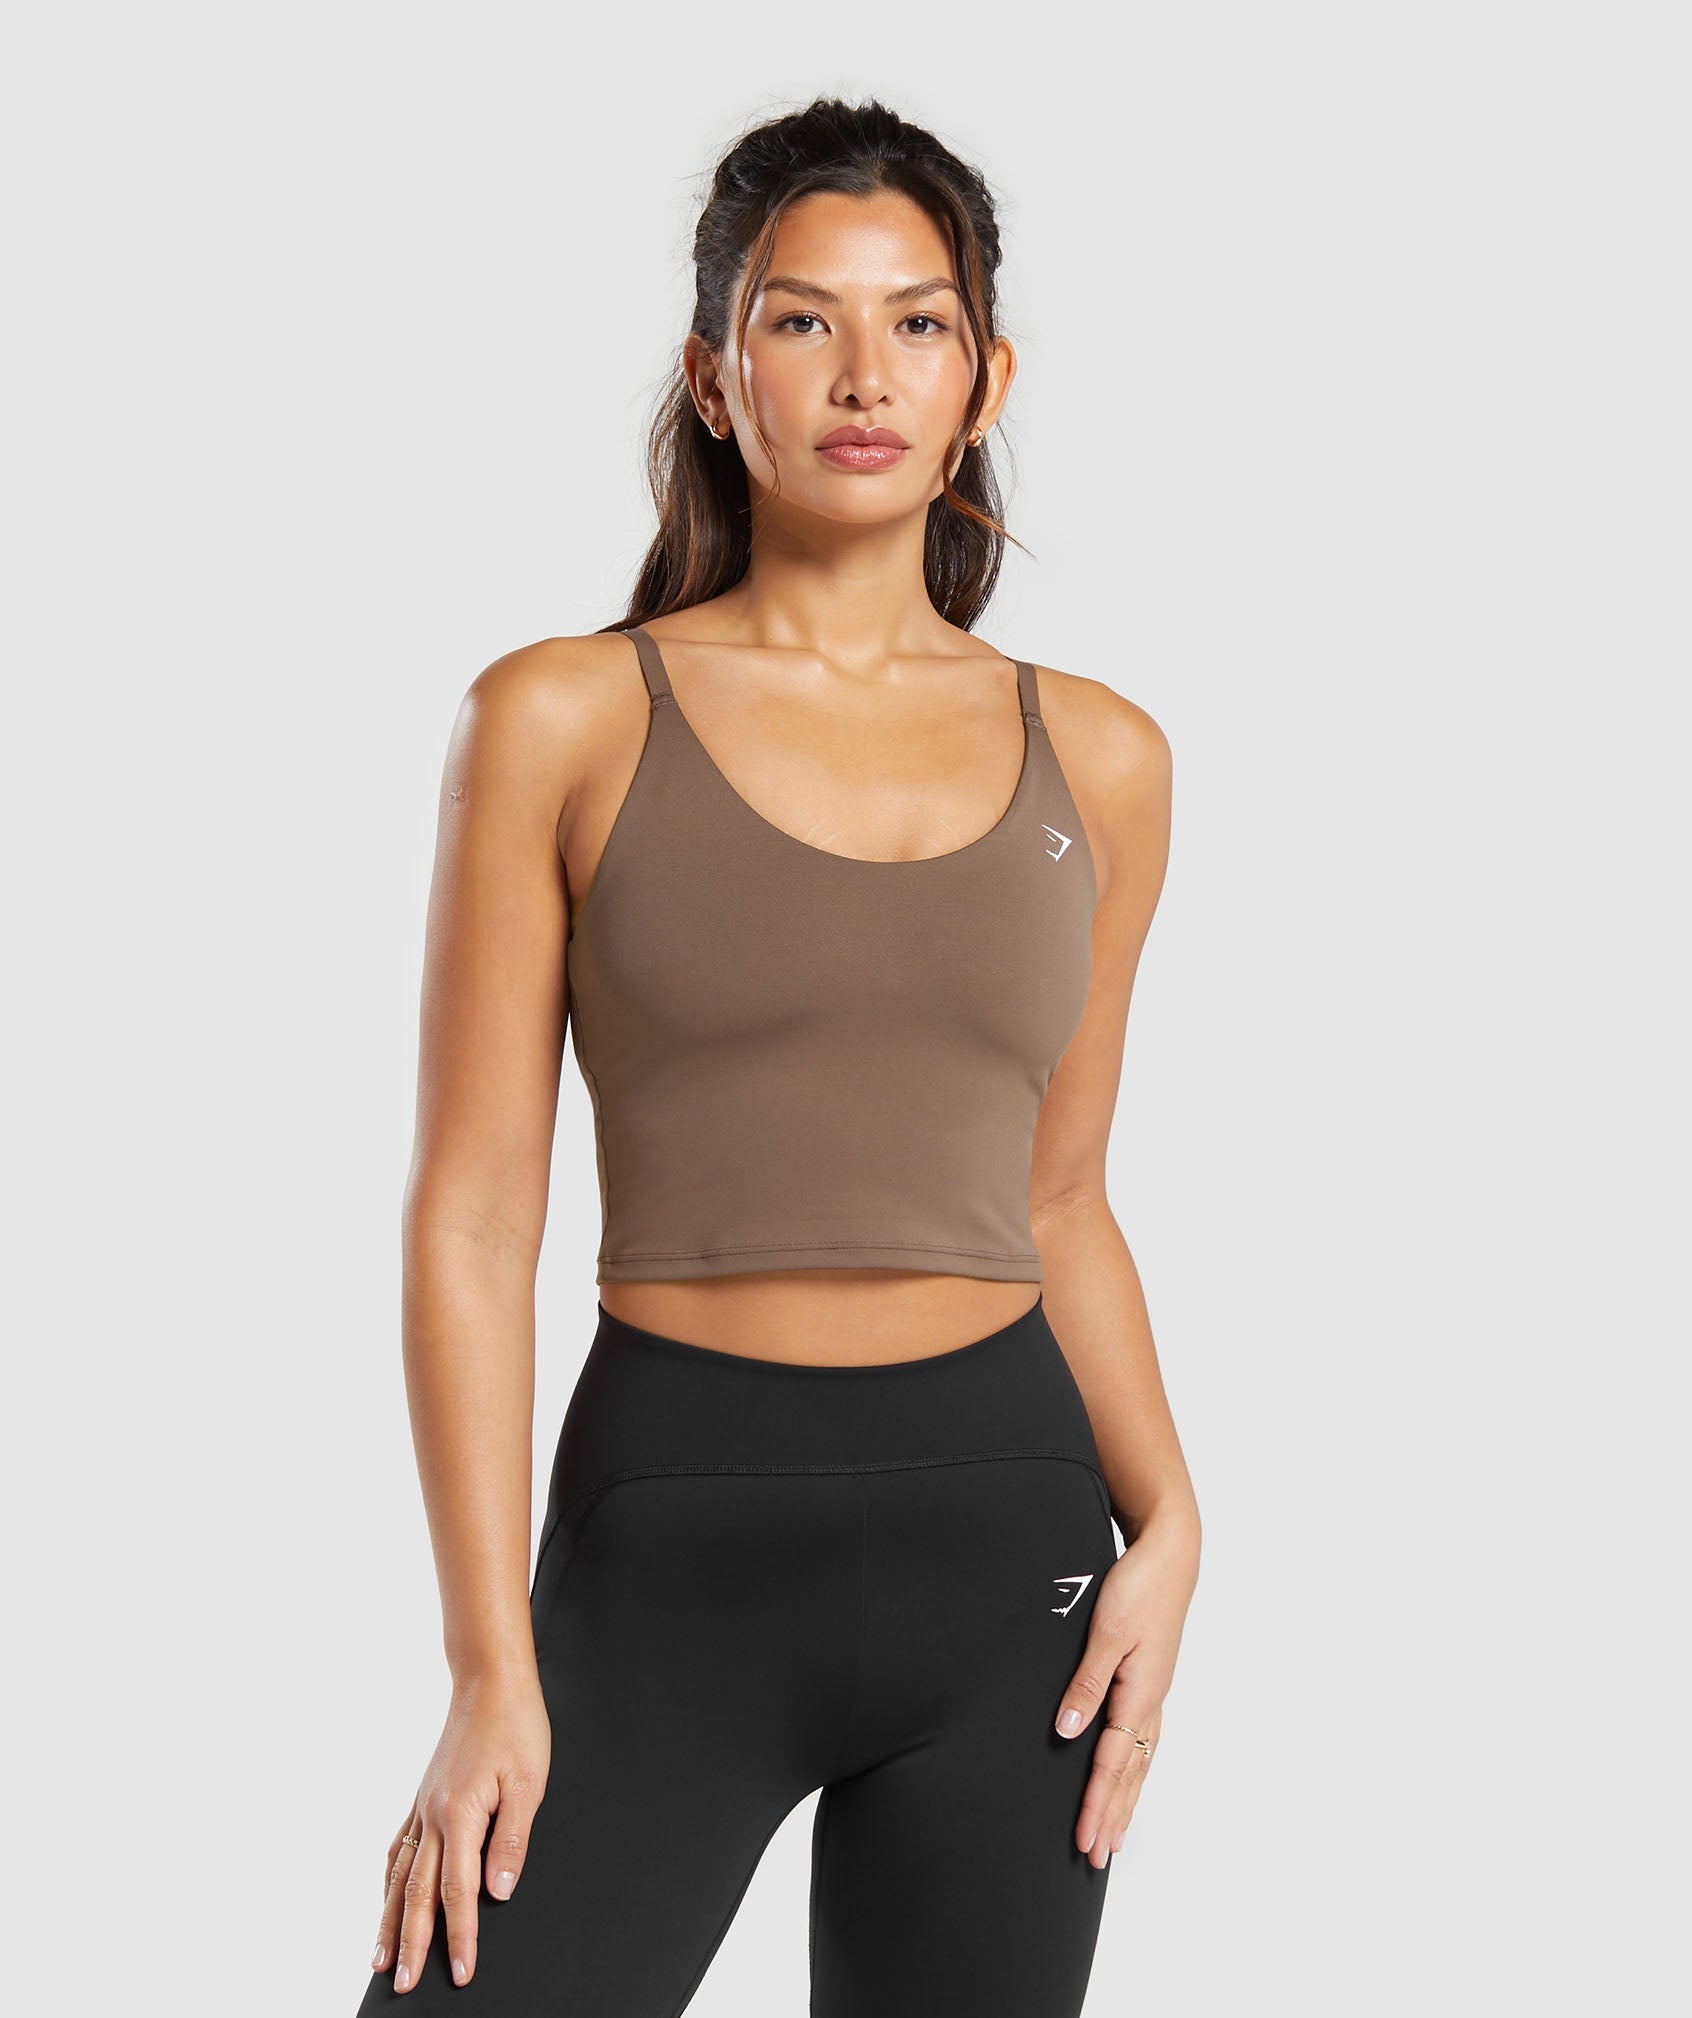 Womens Halter Tops with Built in Bra under 15 Women'S Long Sleeve Round  Neck Crop Top Tee Shirt Basic Solid Tight Slim Fit Cropped Shirt Workout  Yoga Workout Tops for Women Built in Sports Bra Long 